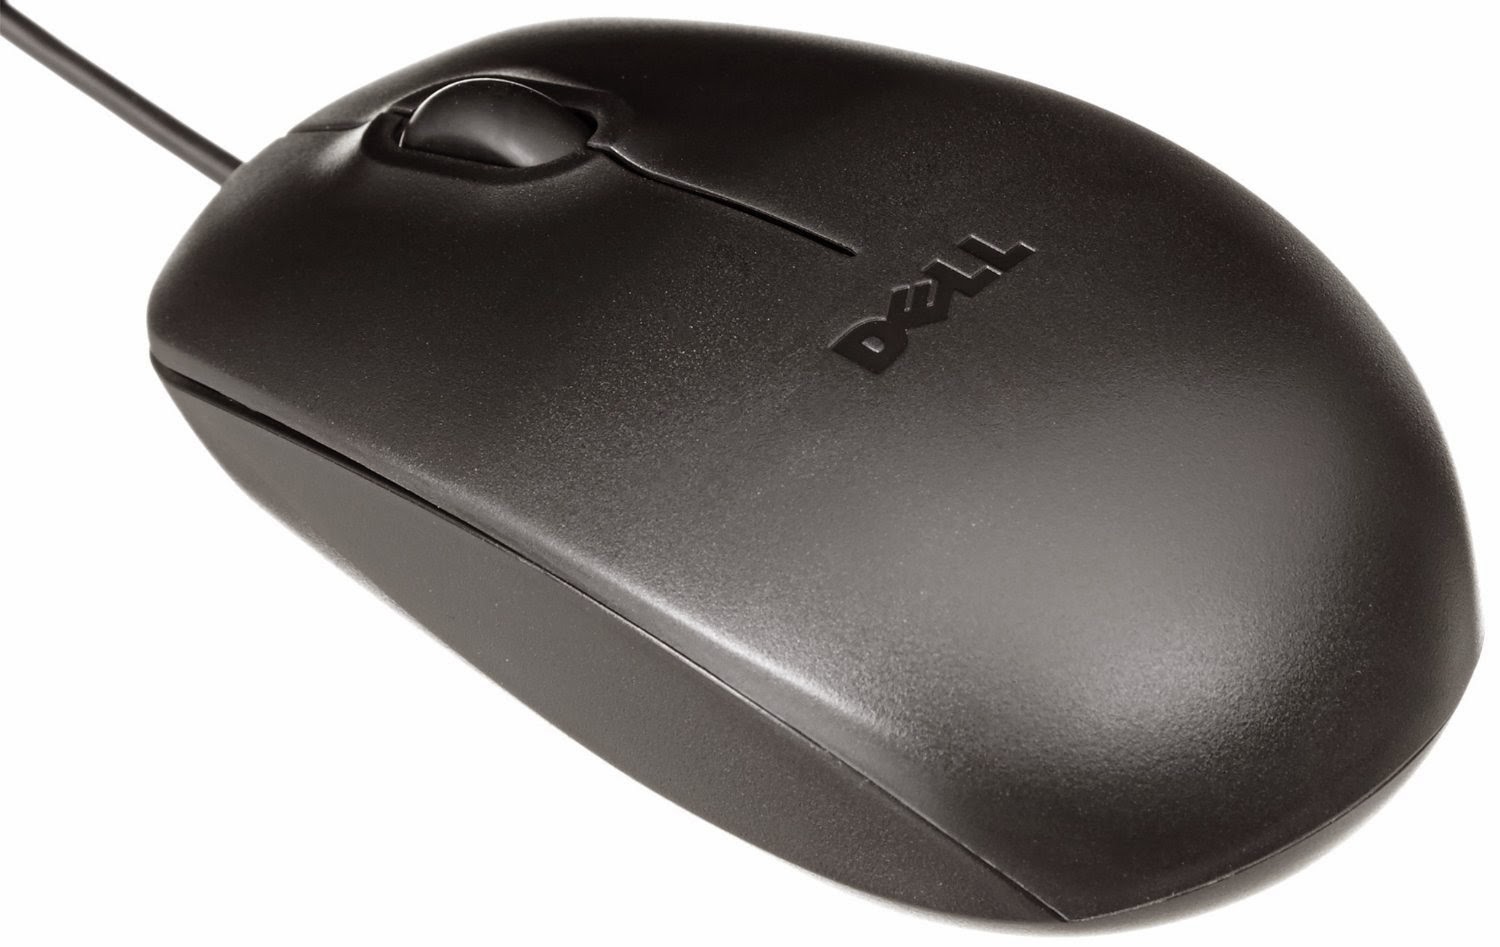 Dell MS111 Wired Optical Mouse Offer Price Rs229